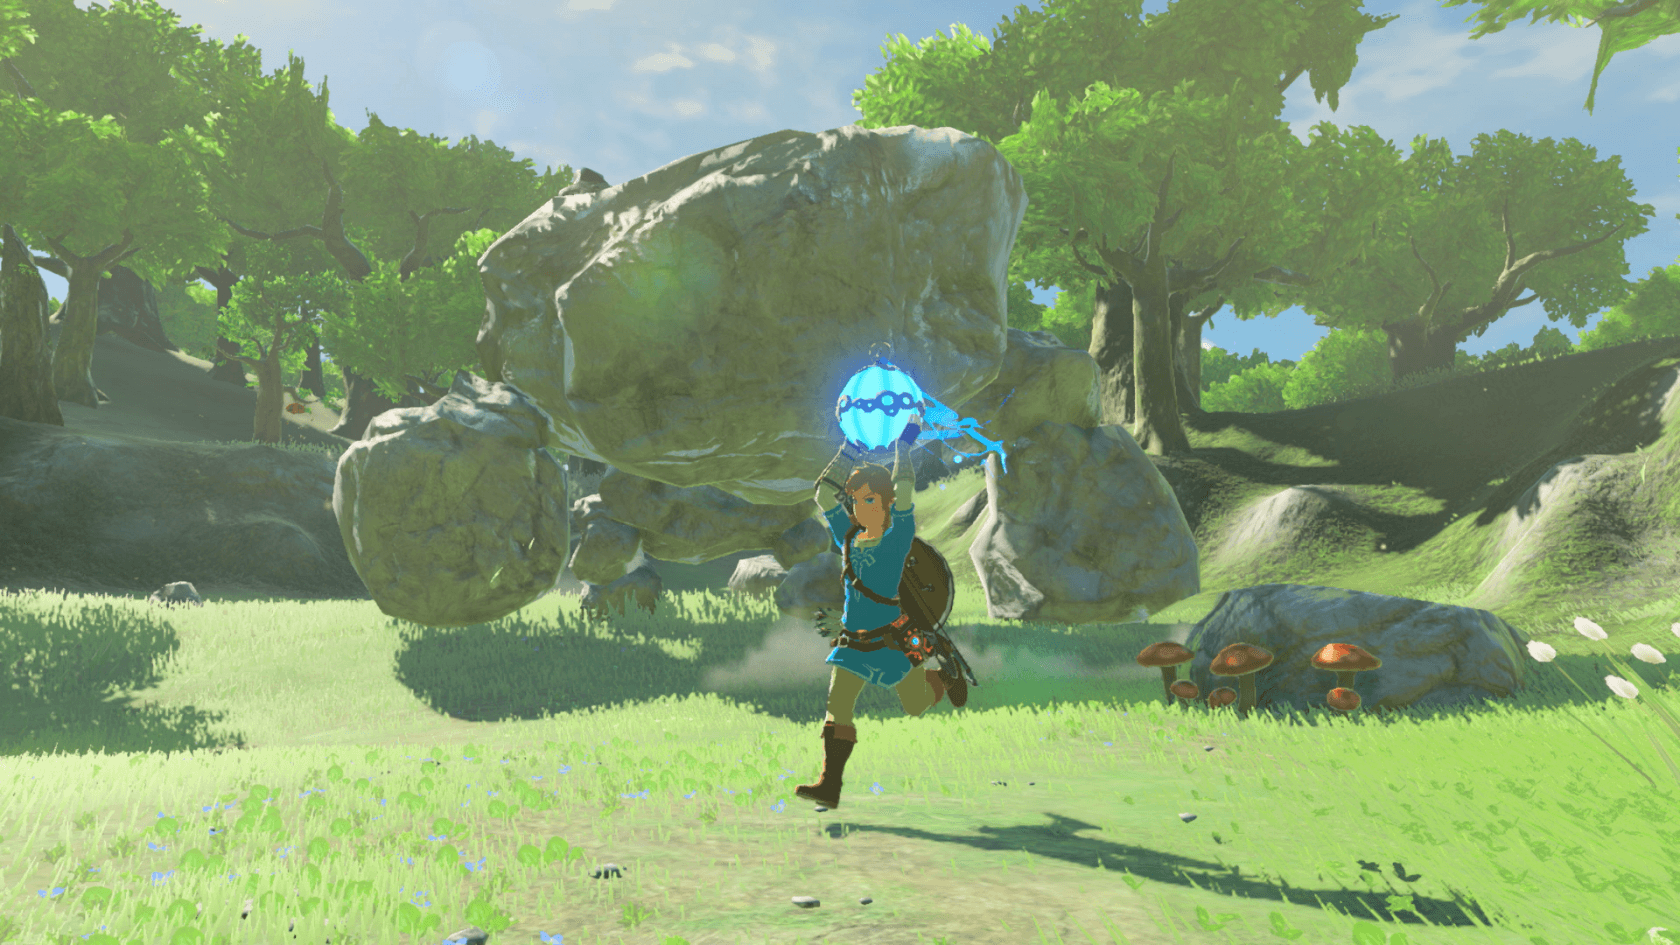 It's now possible to play Breath of the Wild on PC at 4K and 60 FPS